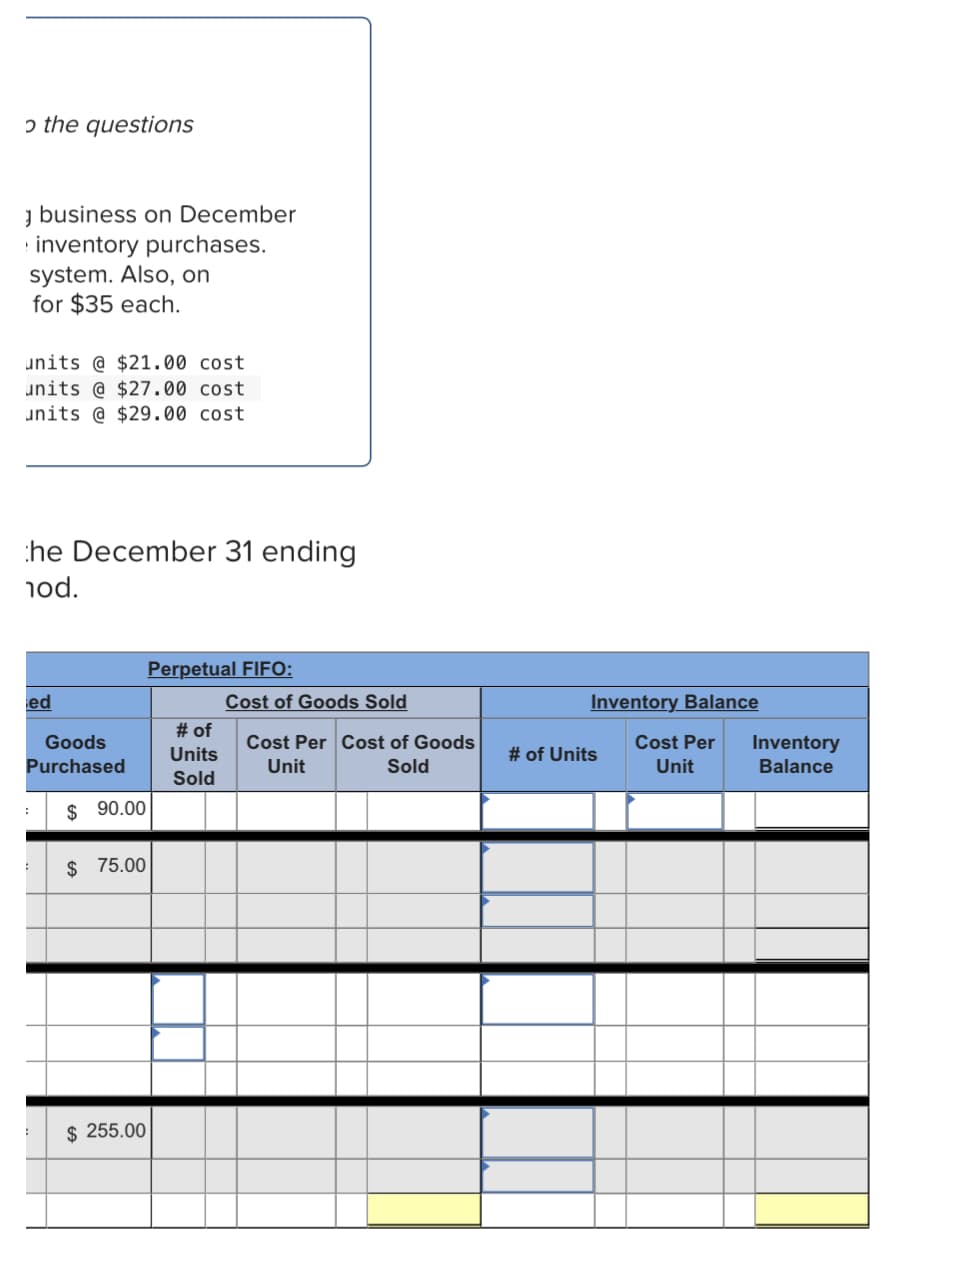 ɔ the questions
y business on December
· inventory purchases.
system. Also, on
for $35 each.
units @ $21.00 cost
units @ $27.00 cost
units @ $29.00 cost
he December 31 ending
nod.
Perpetual FIFO:
ed
Cost of Goods Sold
Inventory Balance
# of
Goods
Cost Per Cost of Goods
Cost Per
Inventory
Units
# of Units
Purchased
Unit
Sold
Unit
Balance
Sold
$ 90.00
$ 75.00
$ 255.00
